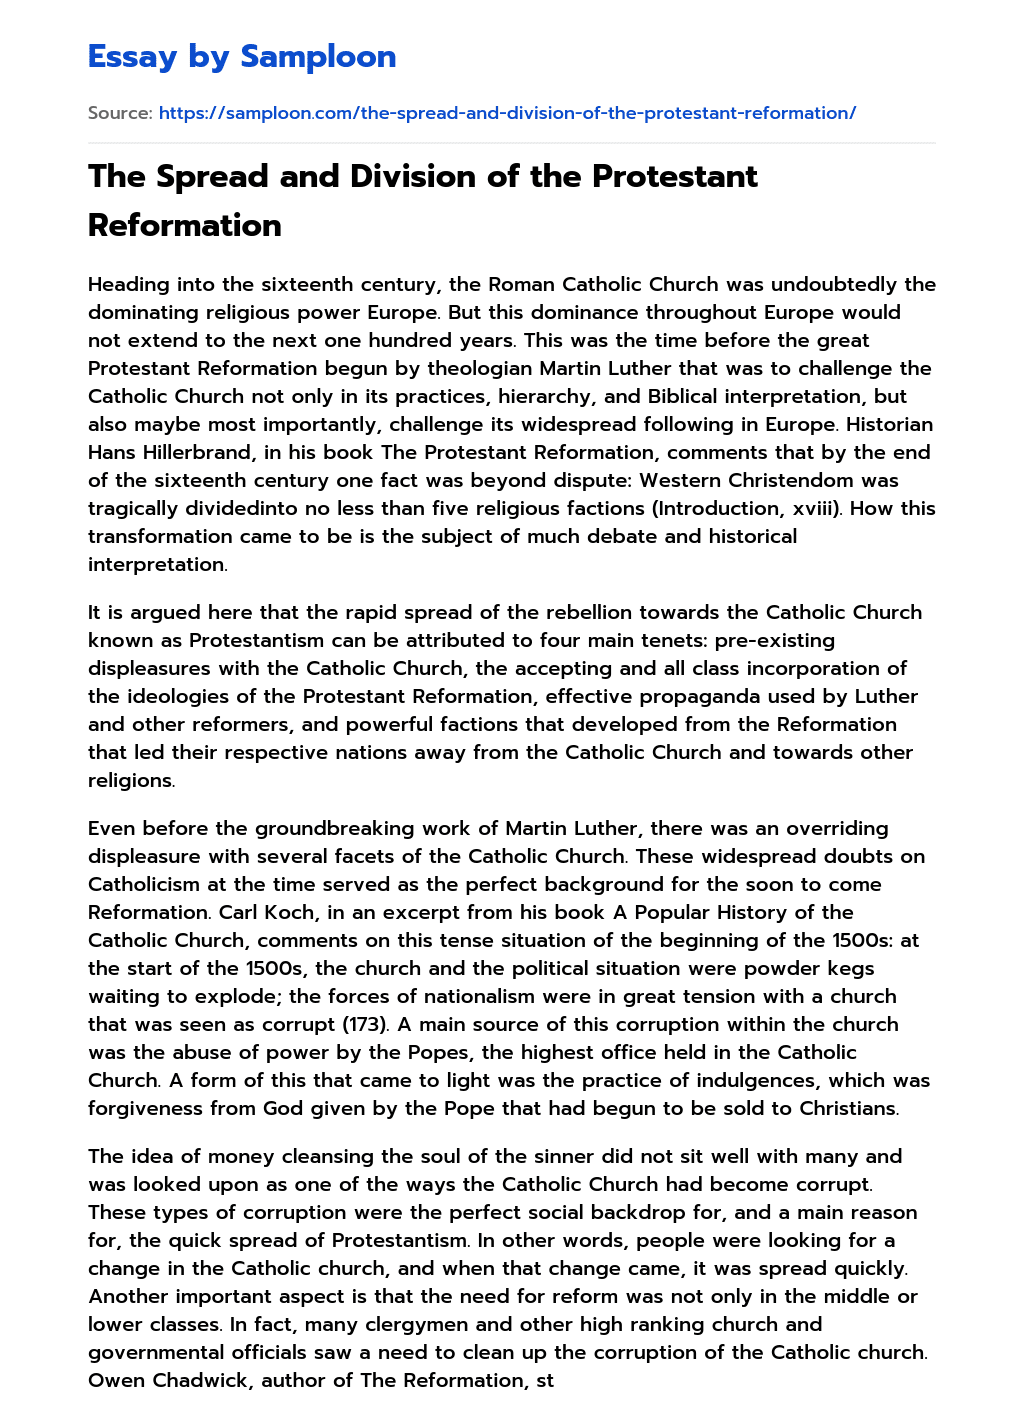 The Spread and Division of the Protestant Reformation essay